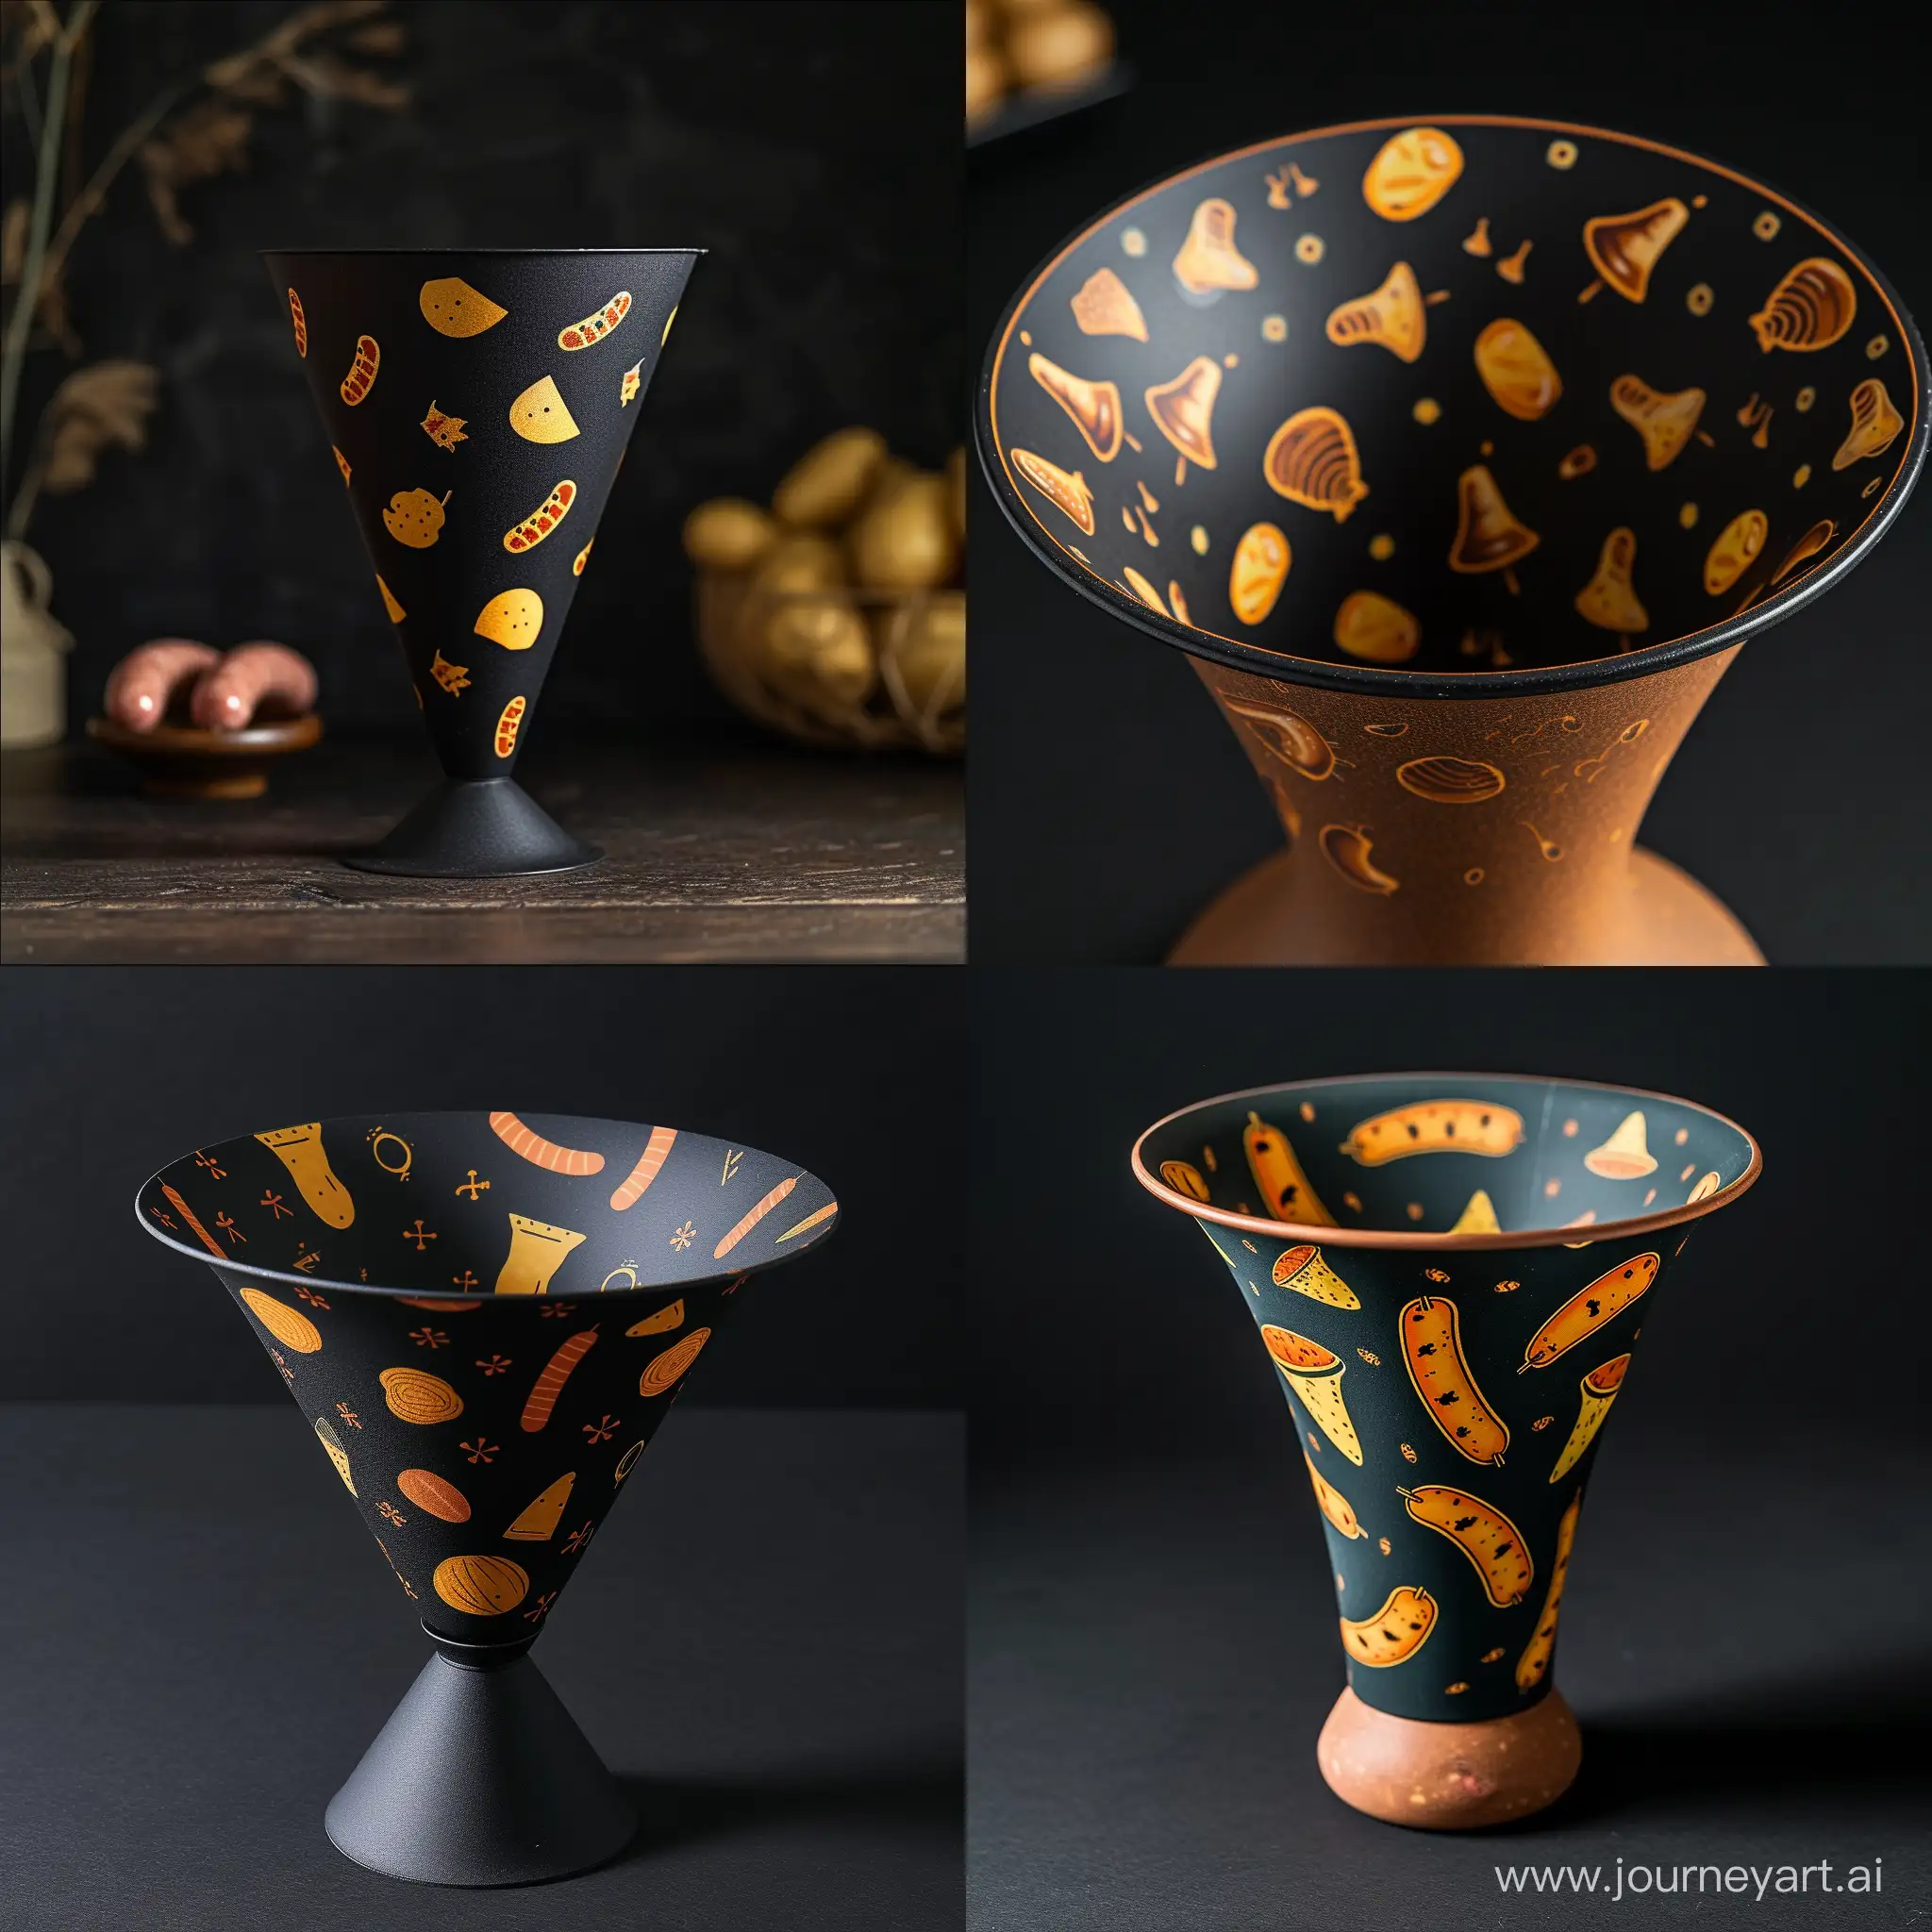 An empty potato funnel with a design on it with a beautiful matte black background. Small pictures of sausages and potatoes are designed on it in yellow and orange colors.